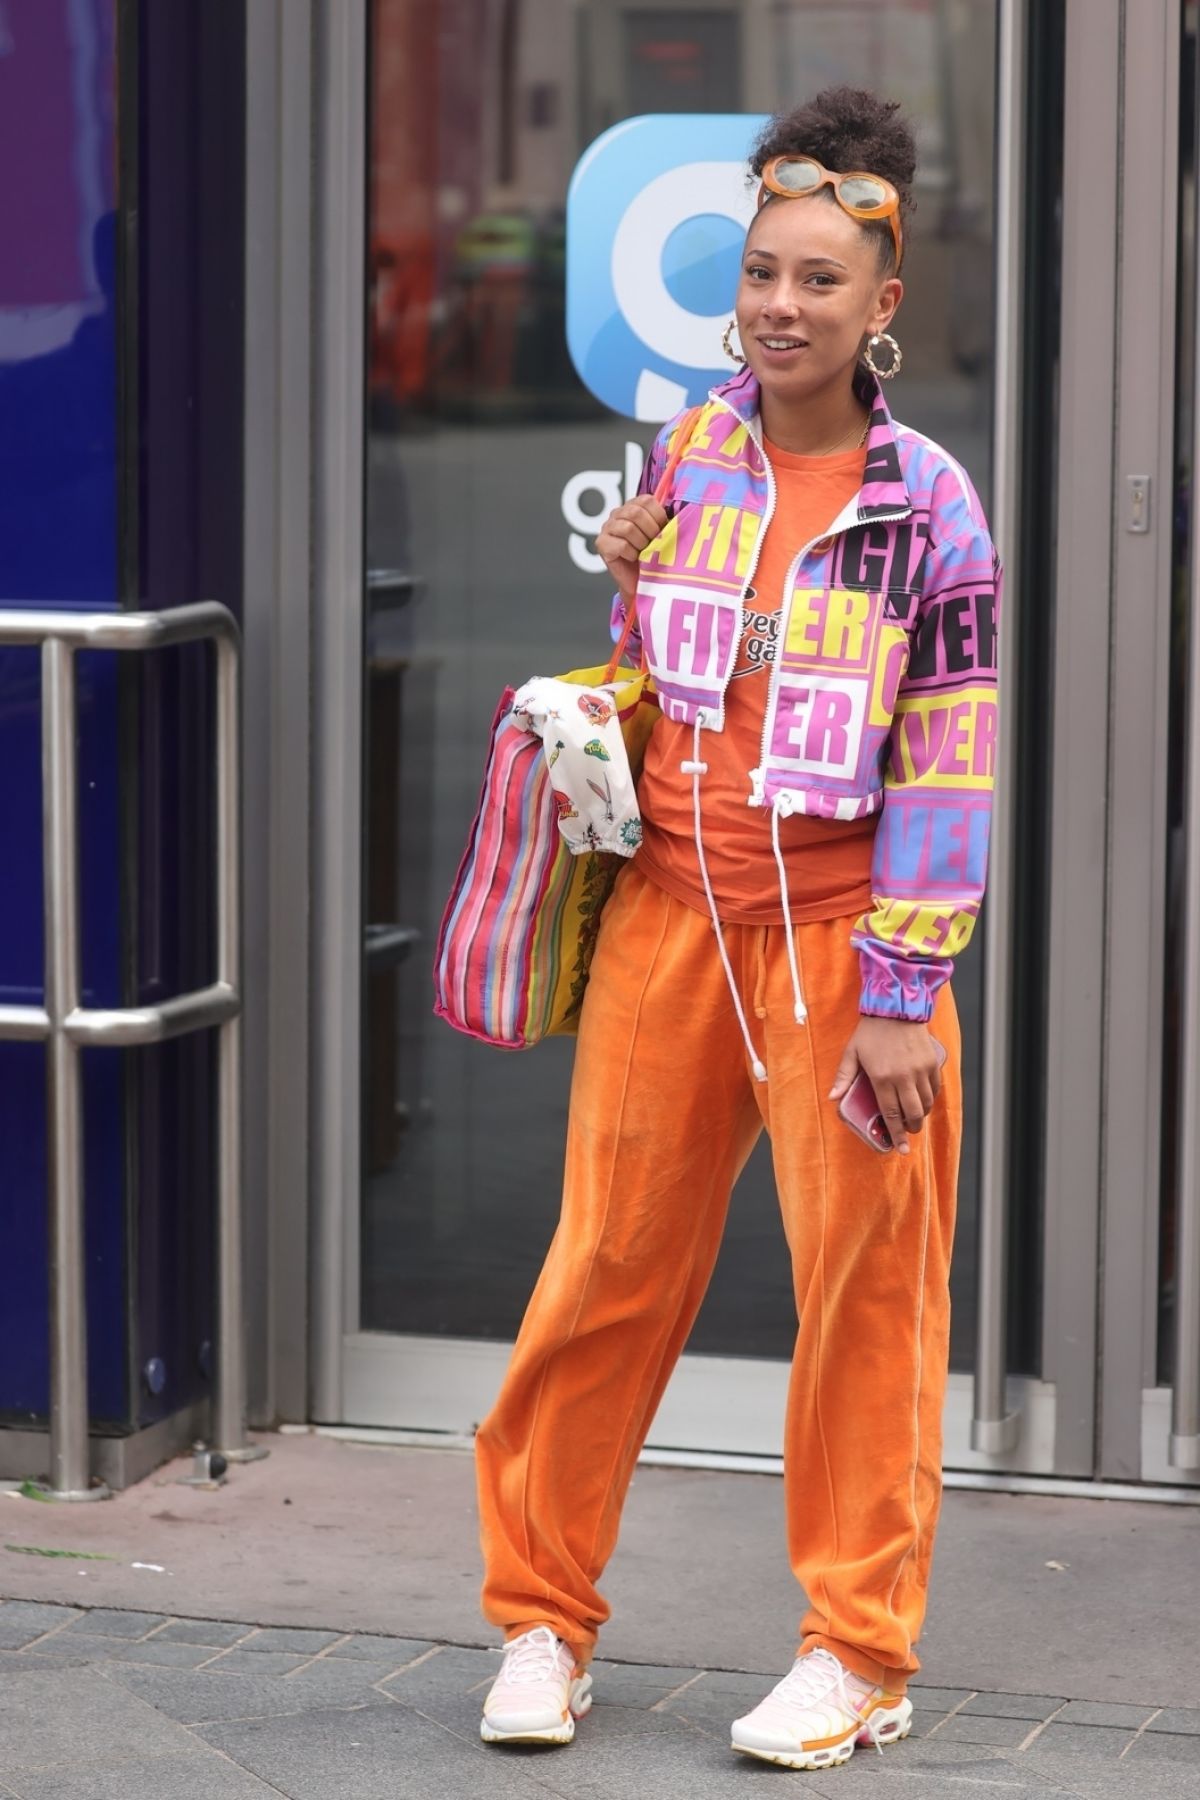 Eliza Rose in Orange Lower with Typography Jacket After Leaves Heart Radio in London 3